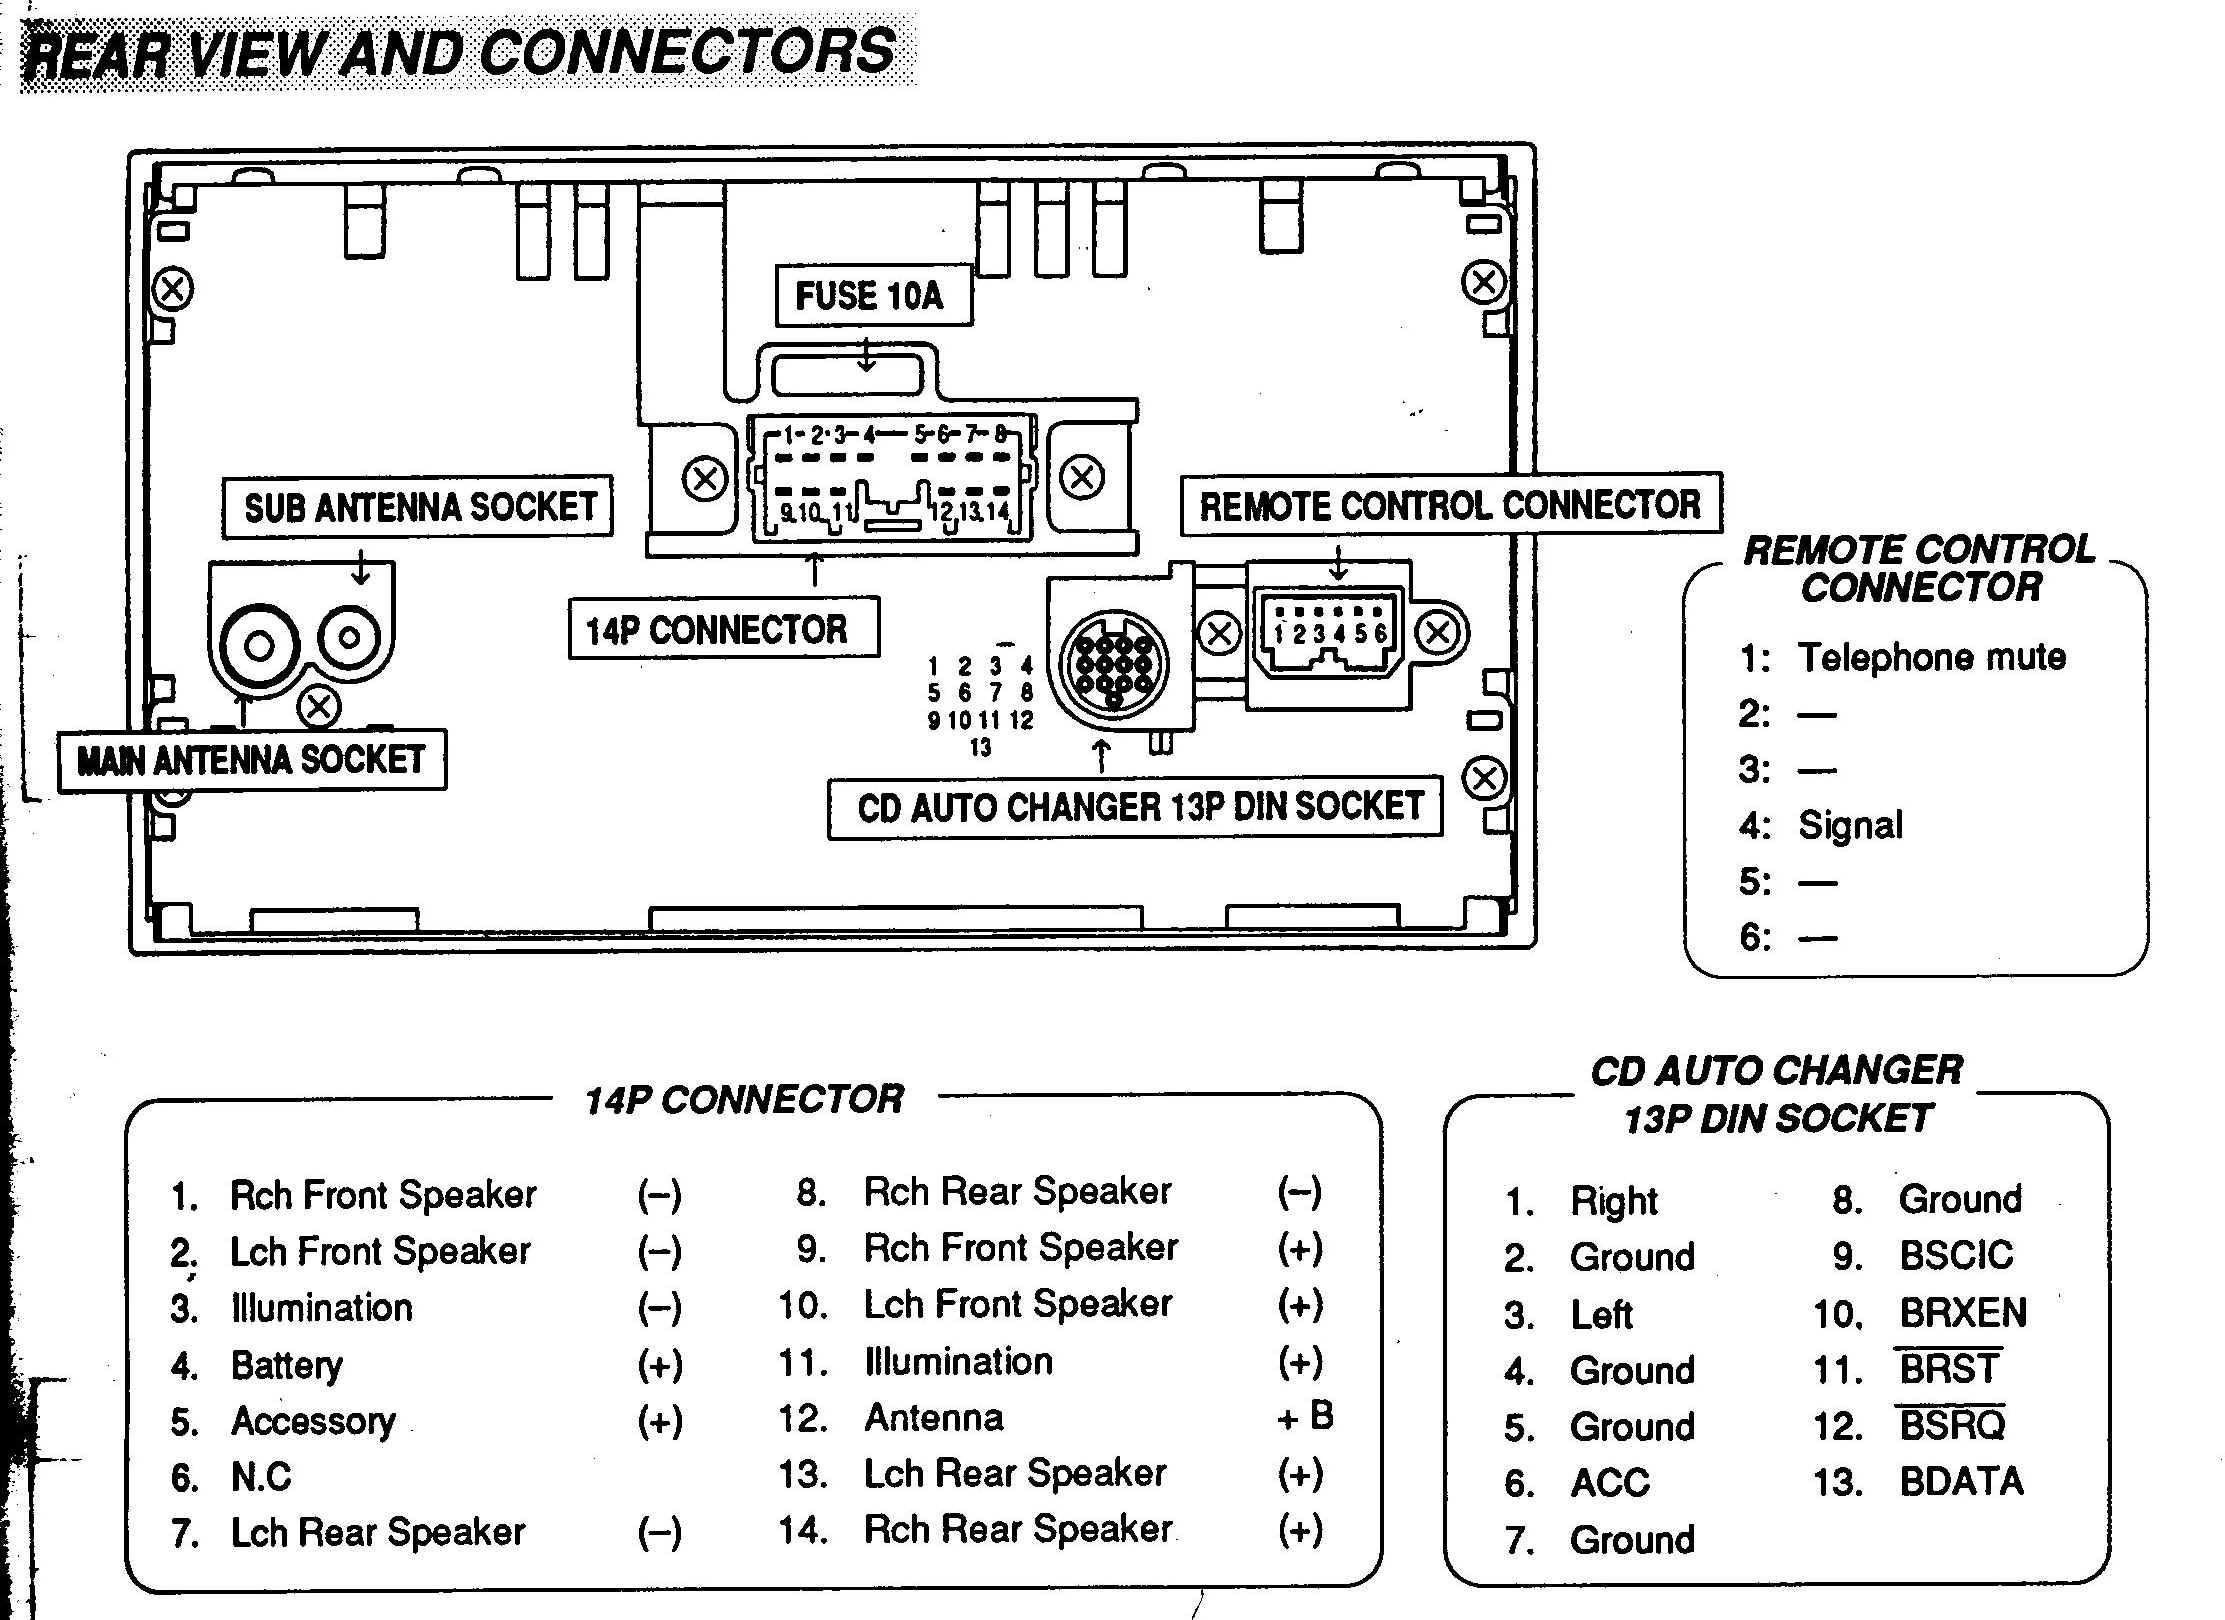 Amplifier Wiring Diagram Beautiful fortable Cinemate Bose Wiring Diagram Ideas Electrical and